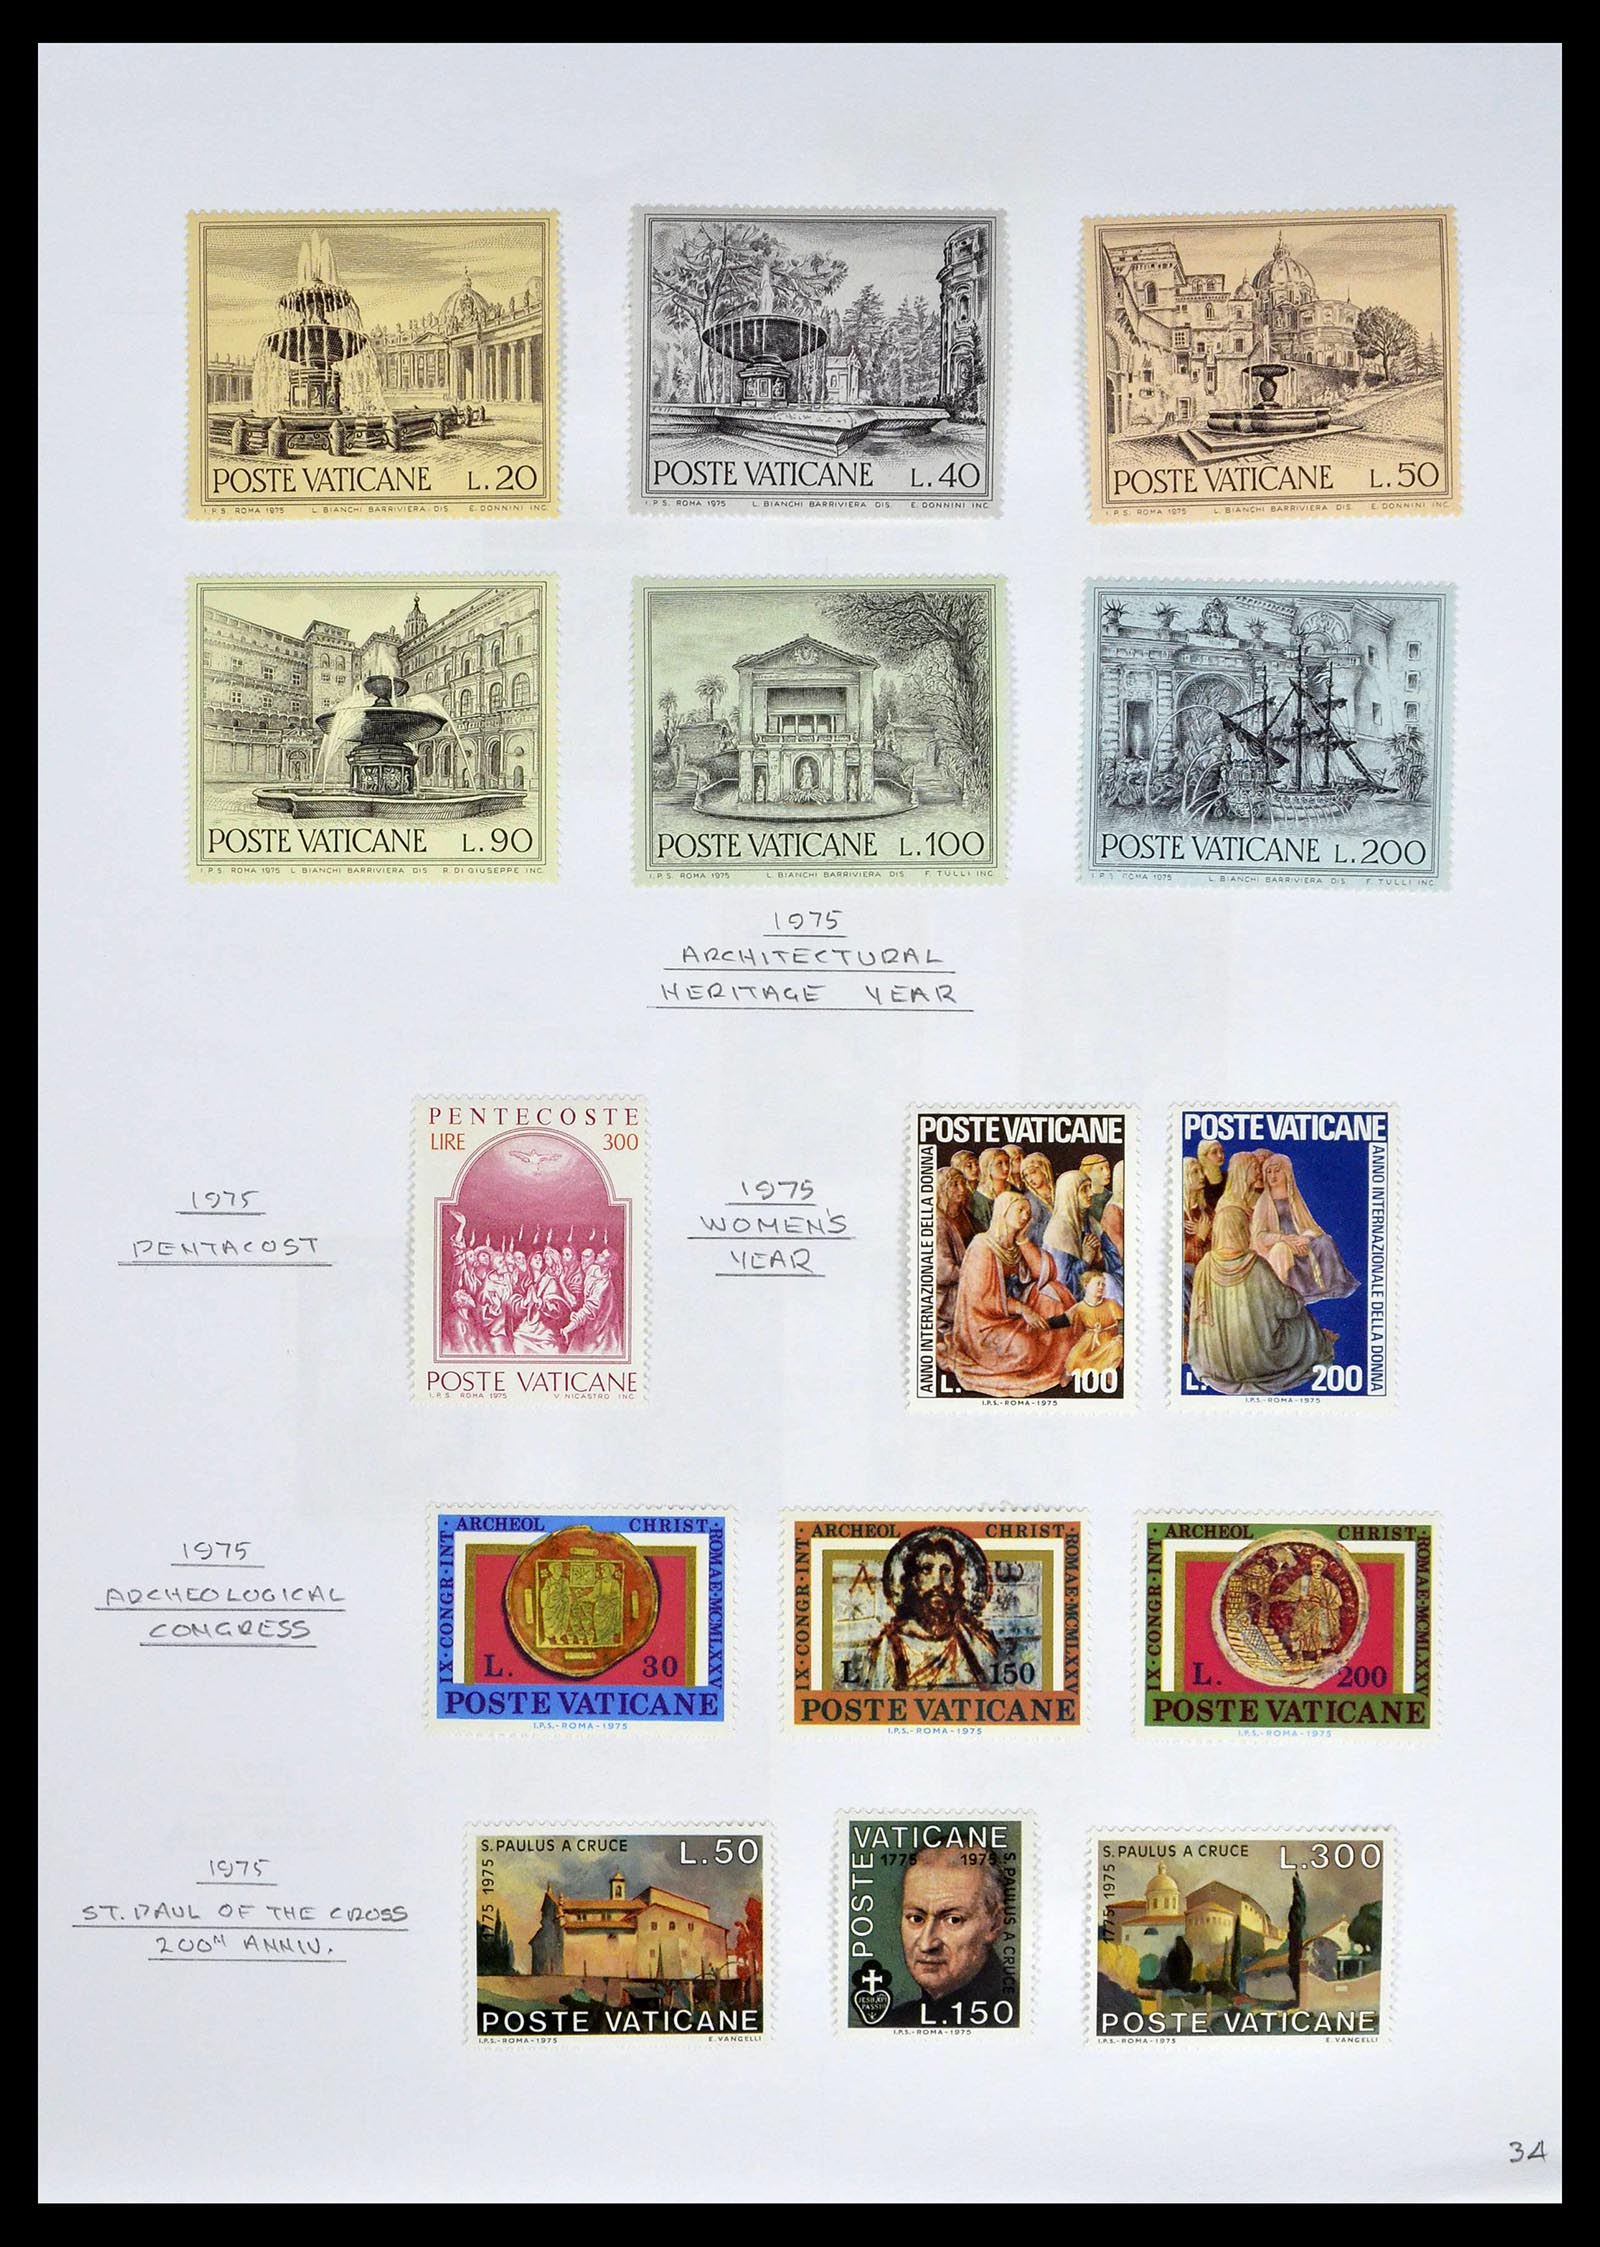 39099 0036 - Stamp collection 39099 Vatican 1852-2008.